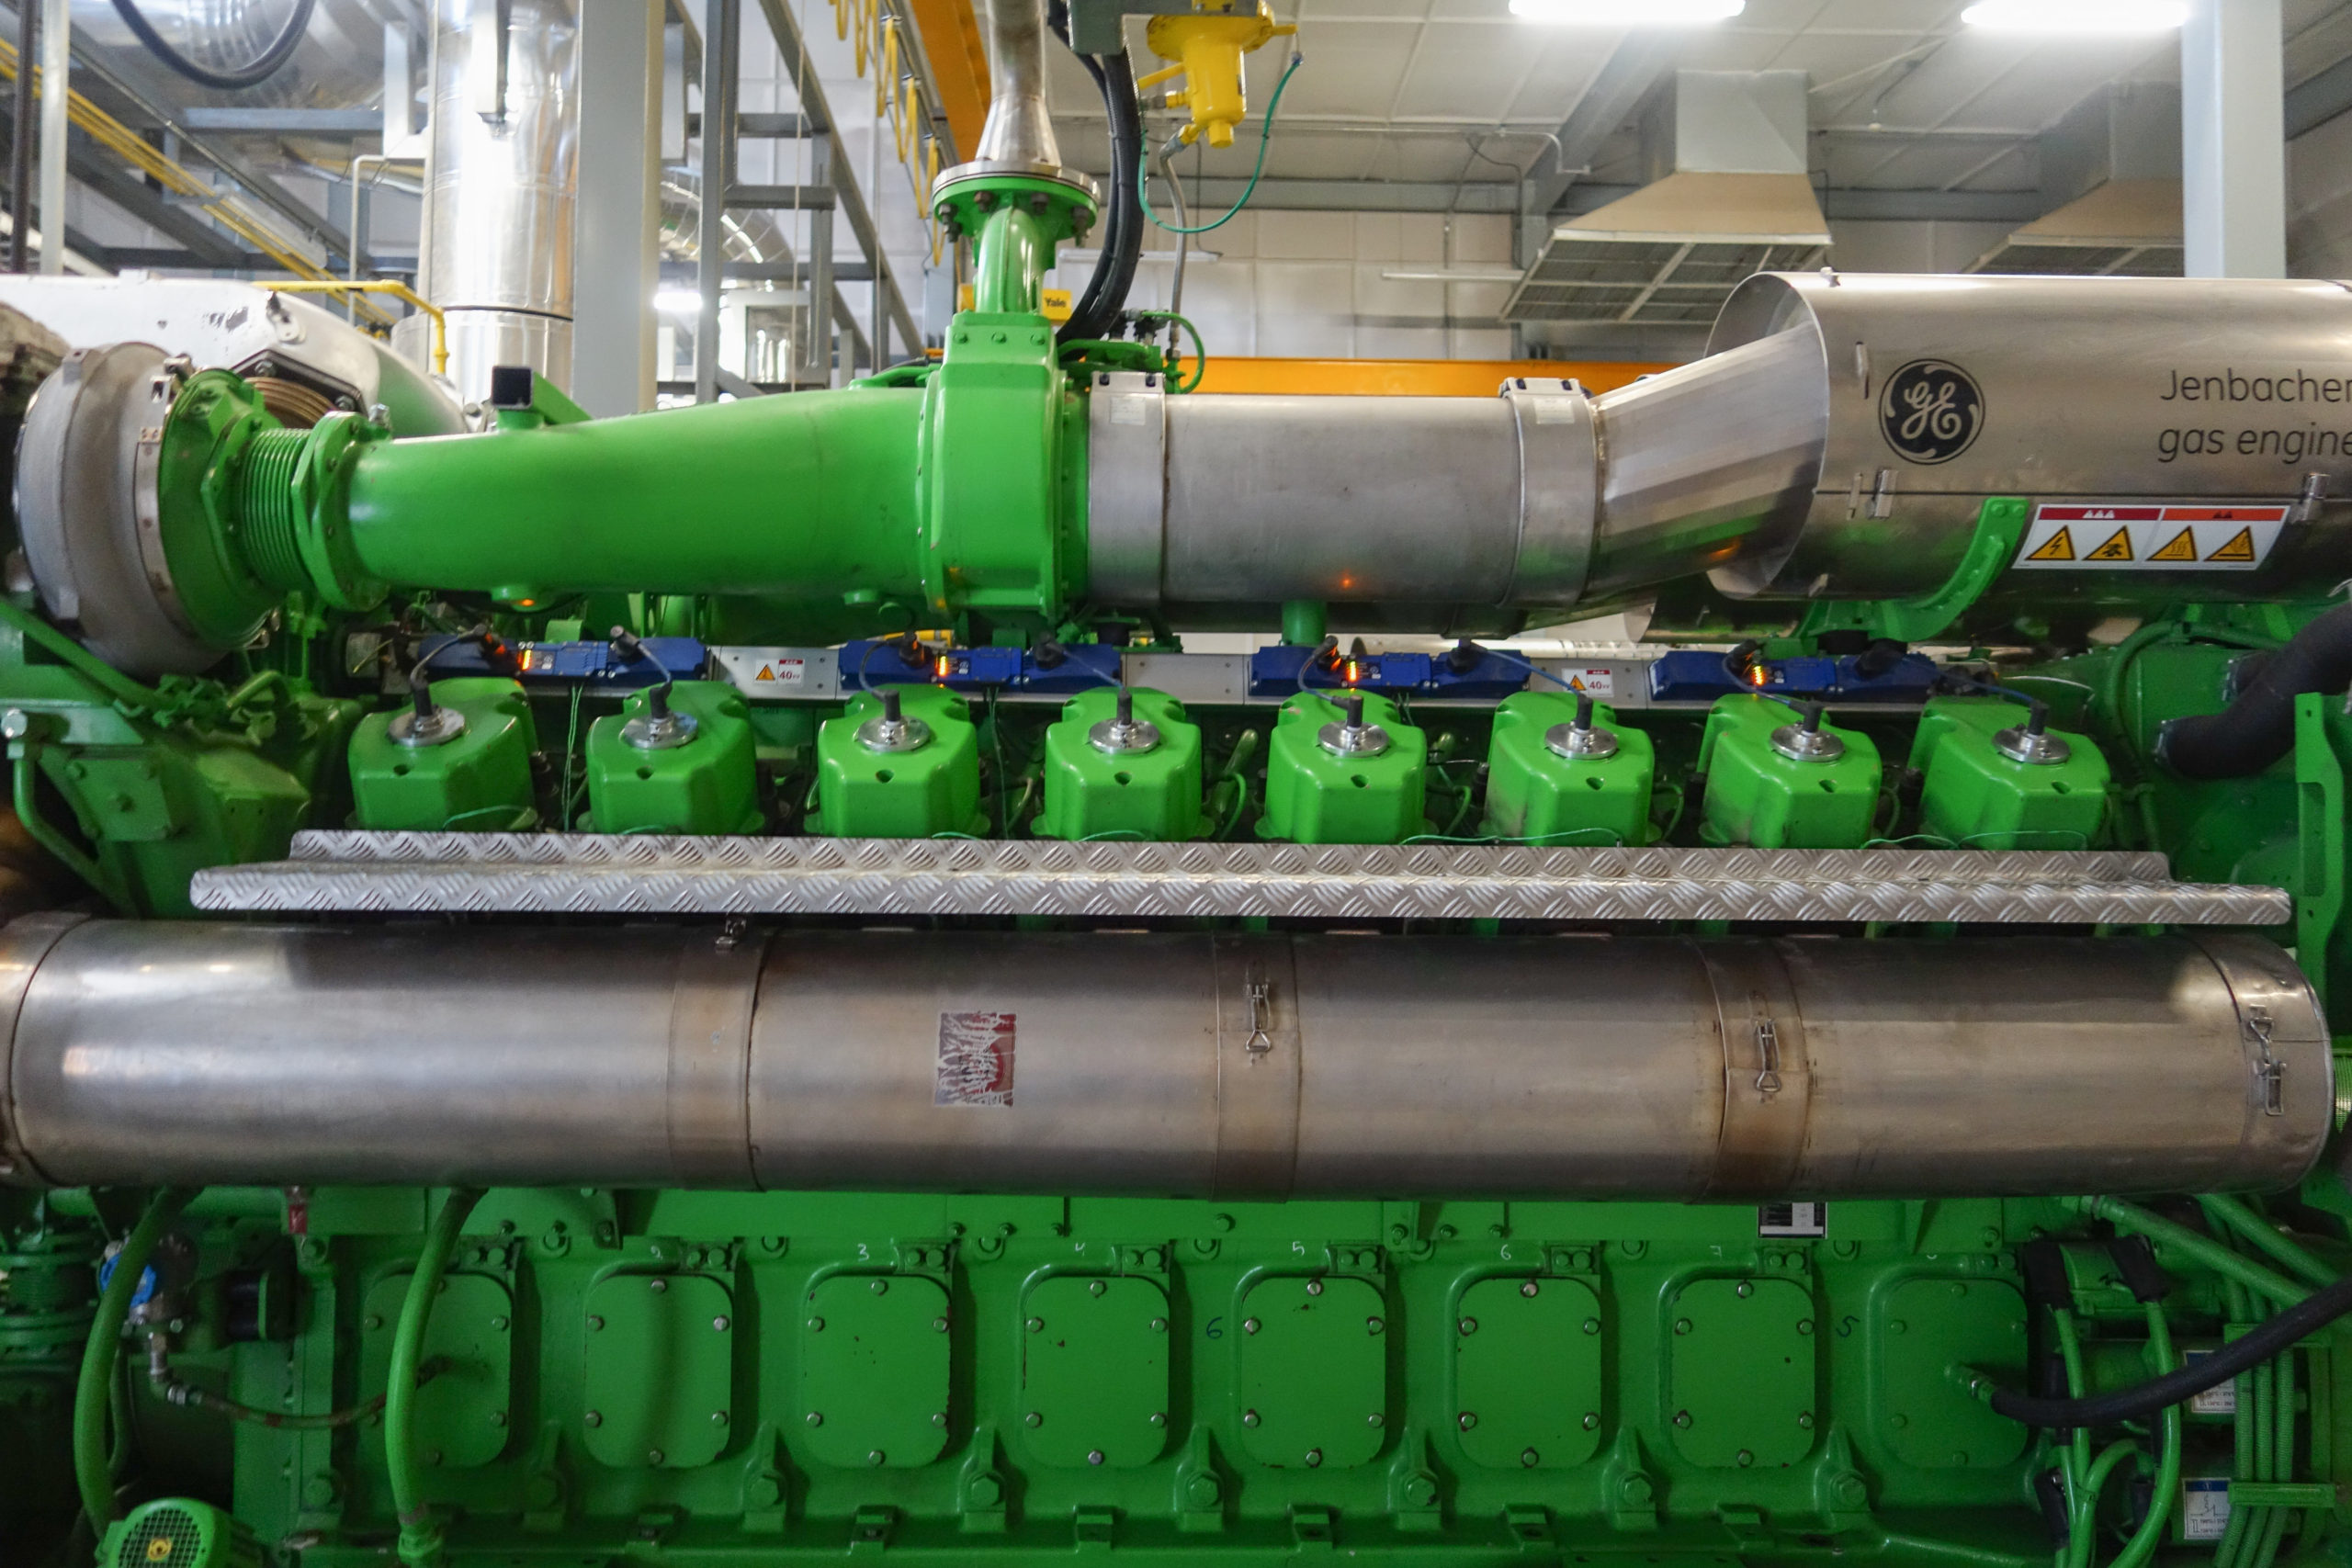 Co-Generation System: In 2015 Cone Denim Parras installed a Cogeneration system to enhance the quality and reliability of the power supply coming to the plant. Using 2016 as the baseline, we have a 26% reduction in Greenhouse gas Emissions associated with the thermal energy capture from the Cogeneration System.